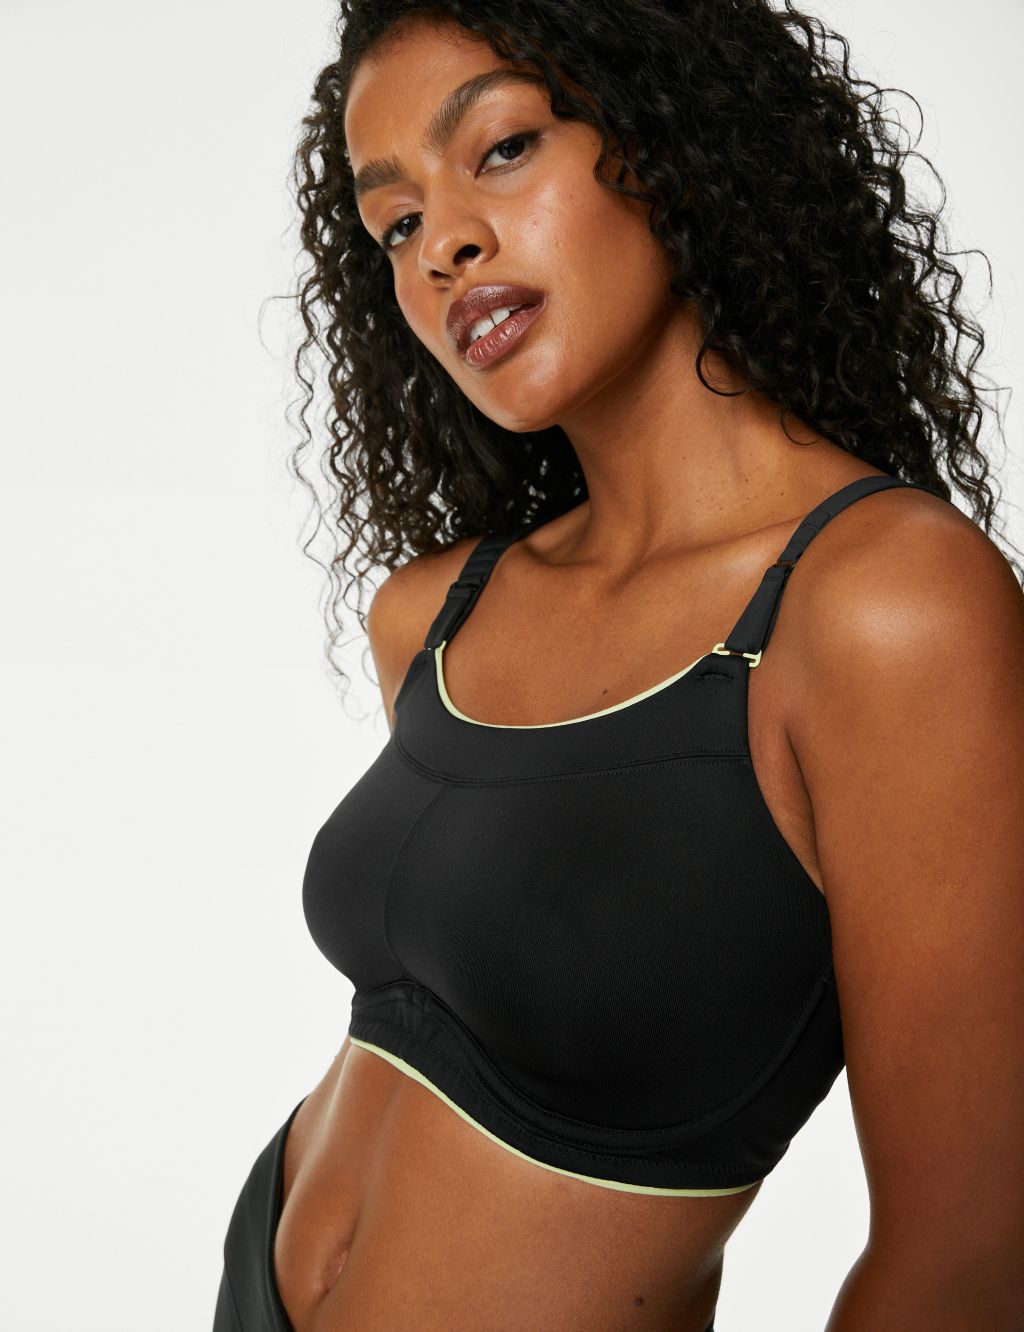 Limitless Non Wired Sports Bra, Lilybod